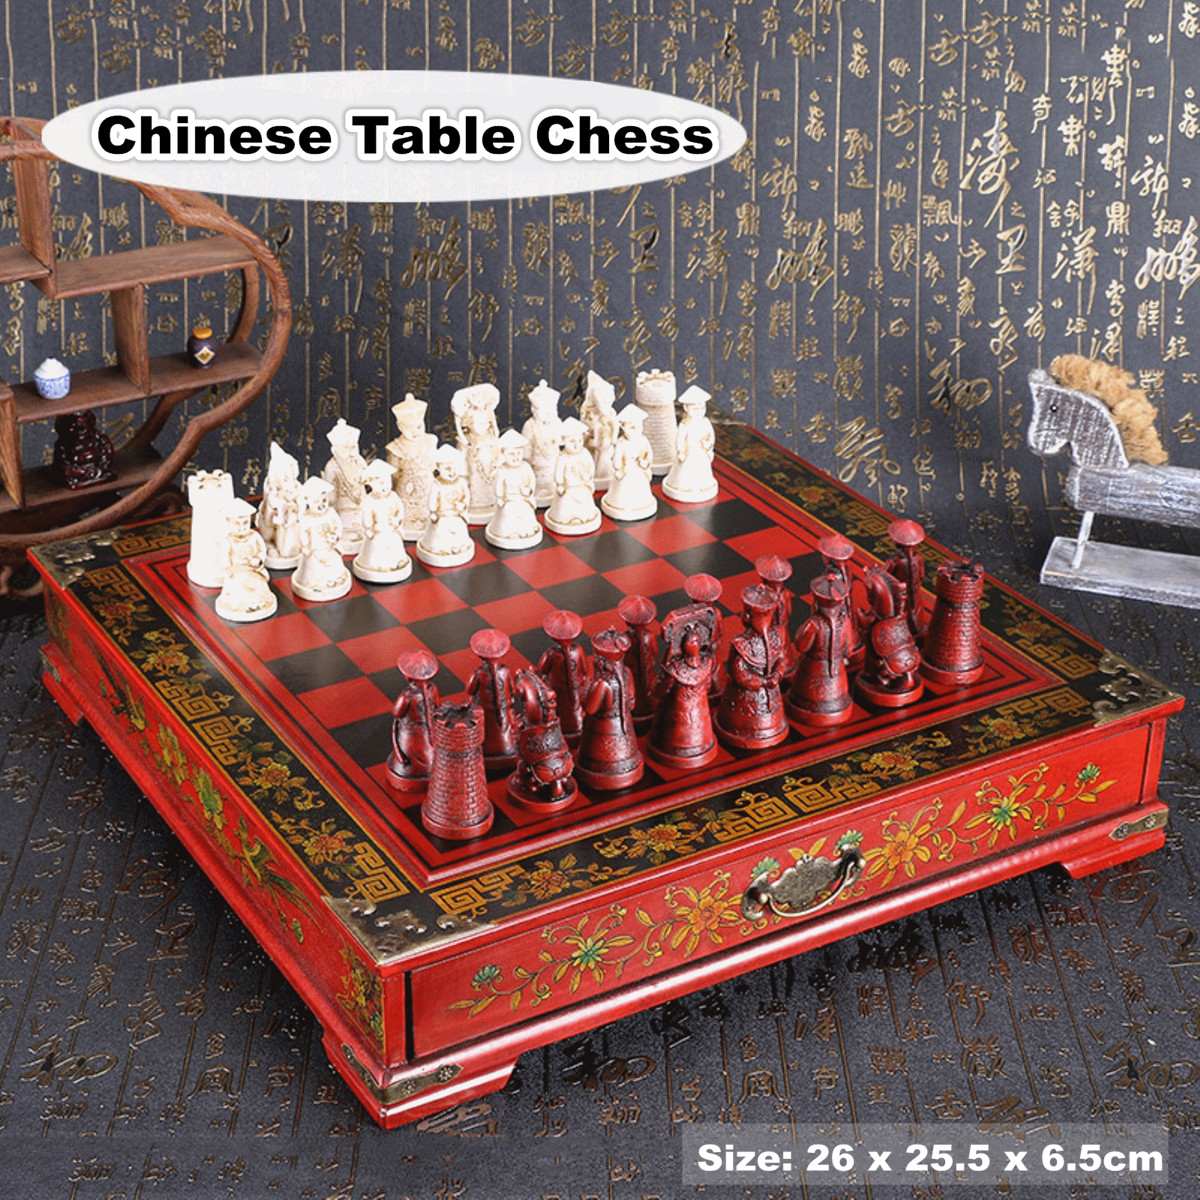 32Pcs/Set Wooden Table Chess Chinese Chess Games Resin Chessman Christmas Birthday Premium Entertainment Board Game